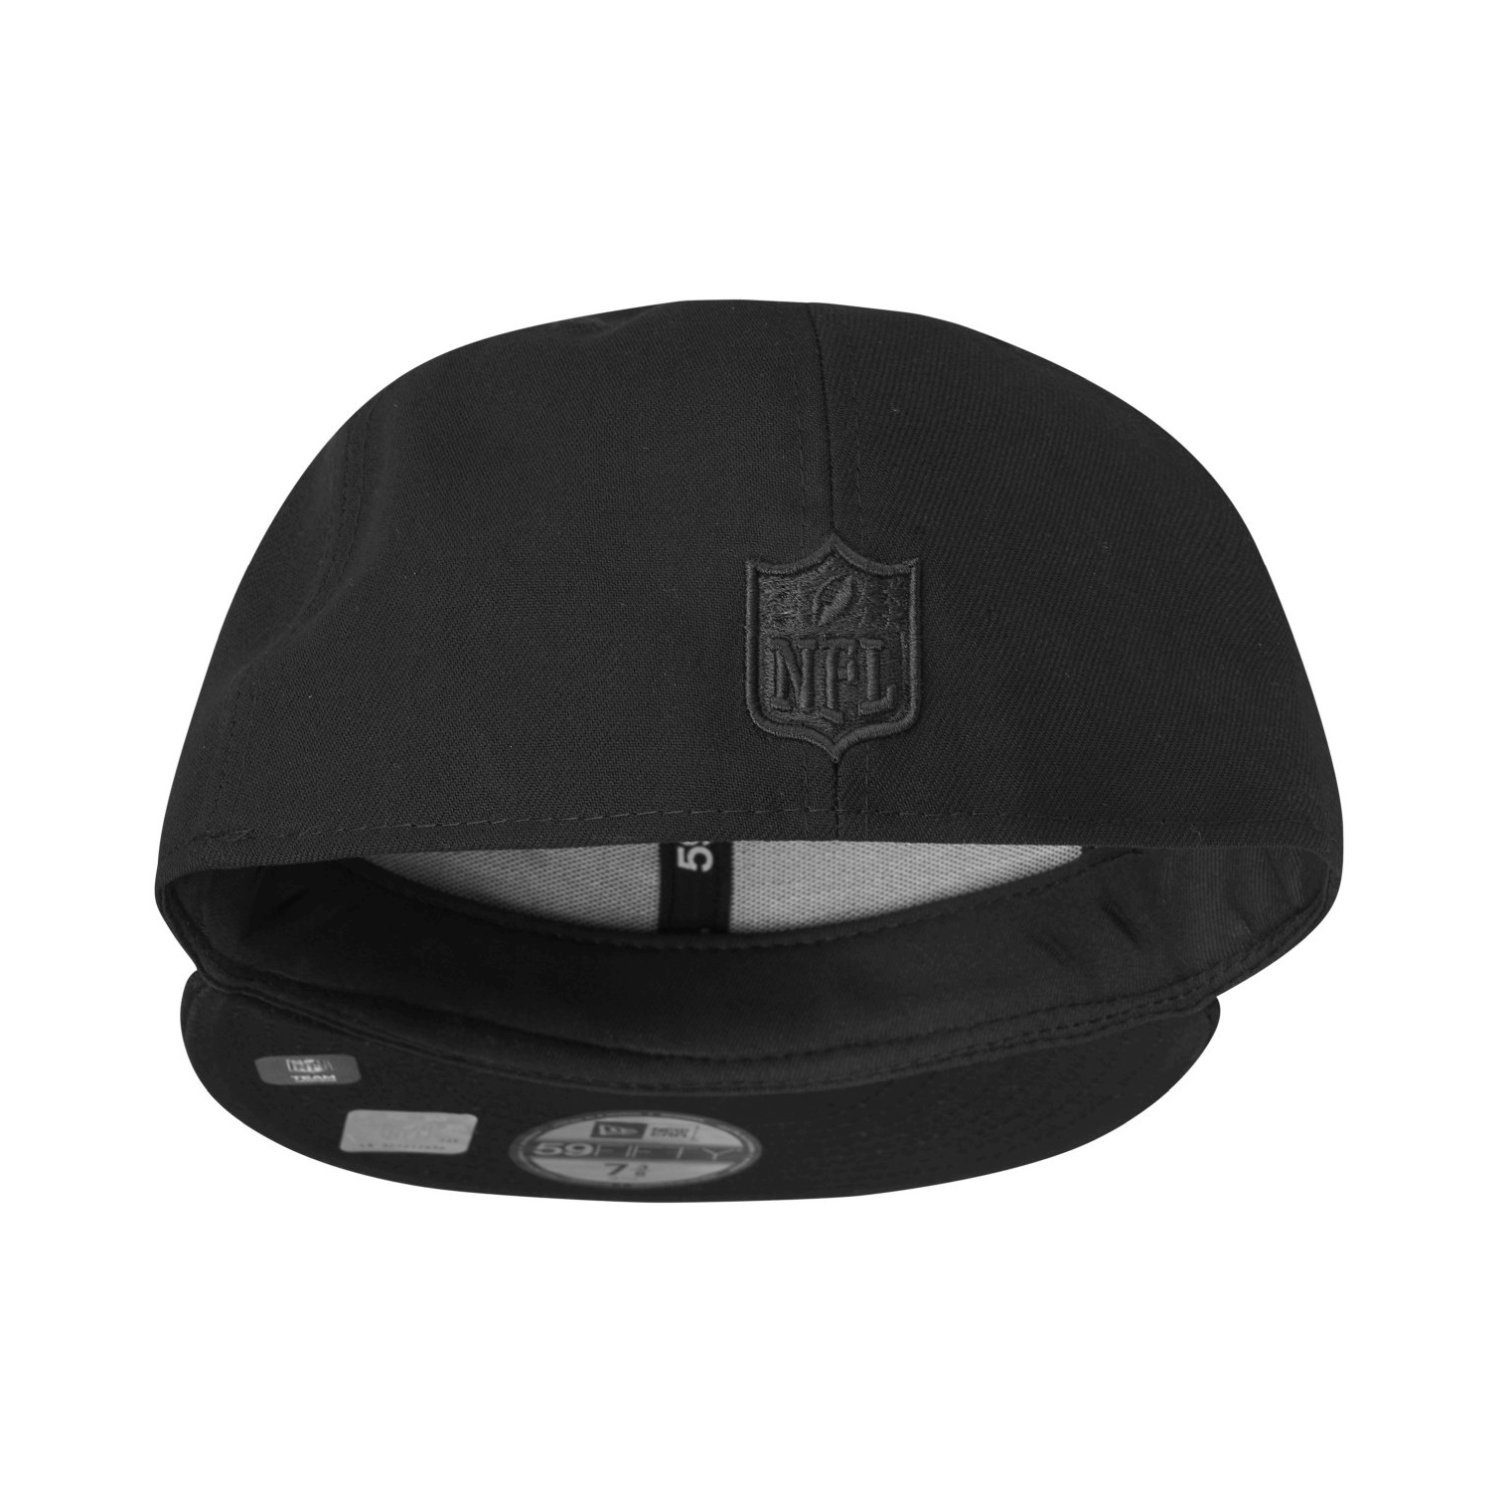 New 59Fifty Cap BLACK NFL Teams Era New Fitted Patriots England SPILL Logo